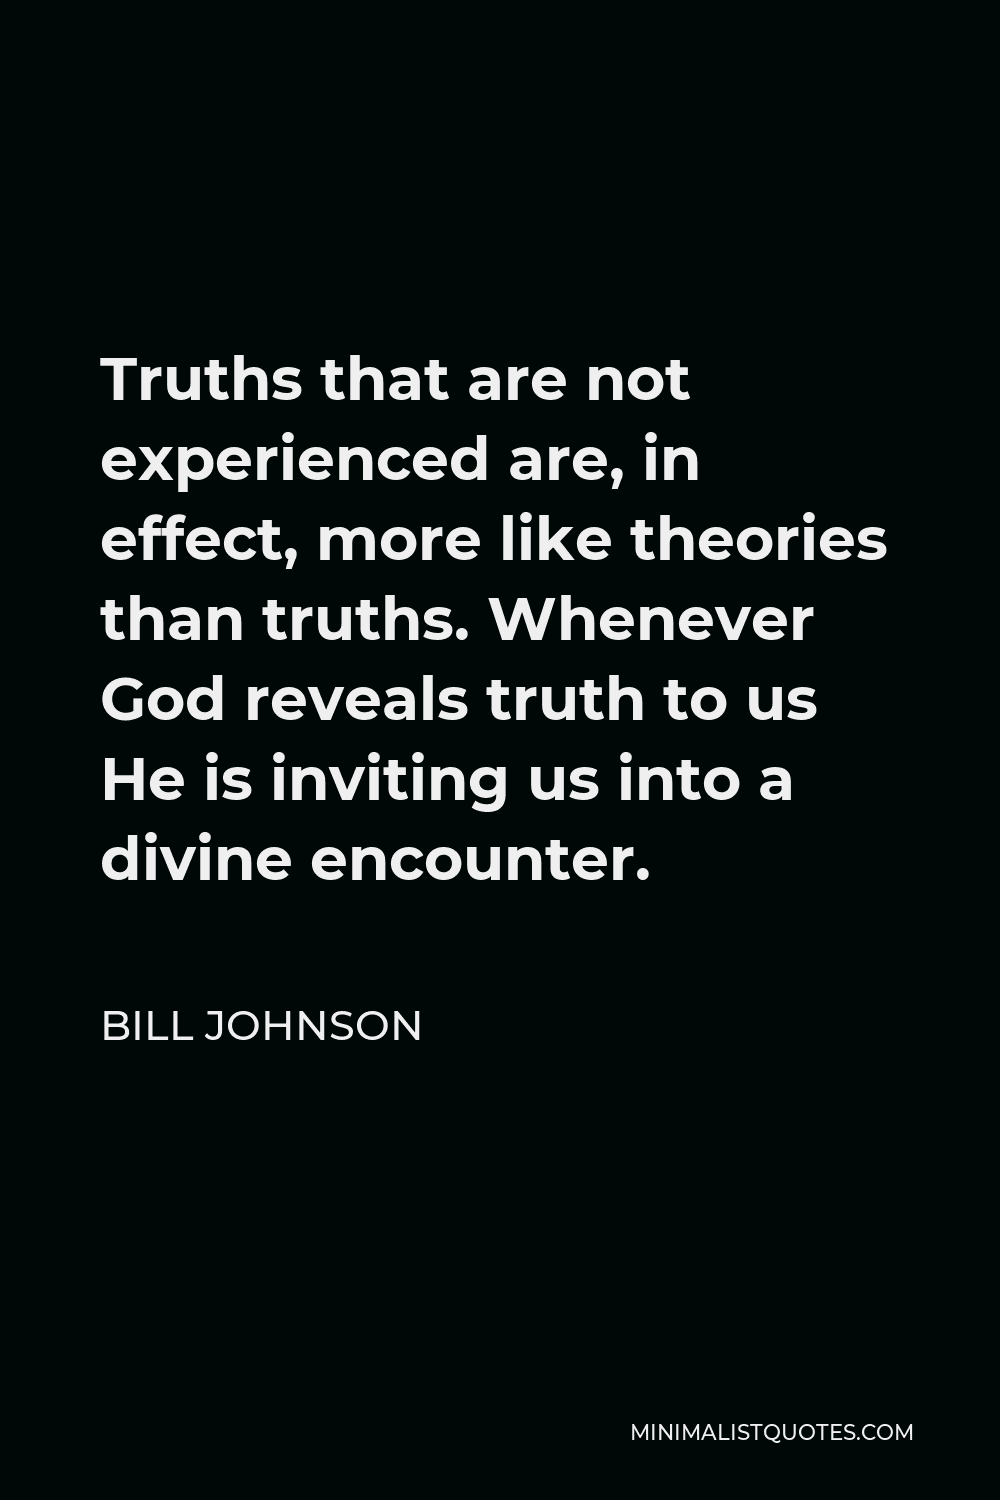 Bill Johnson Quote - Truths that are not experienced are, in effect, more like theories than truths. Whenever God reveals truth to us He is inviting us into a divine encounter.